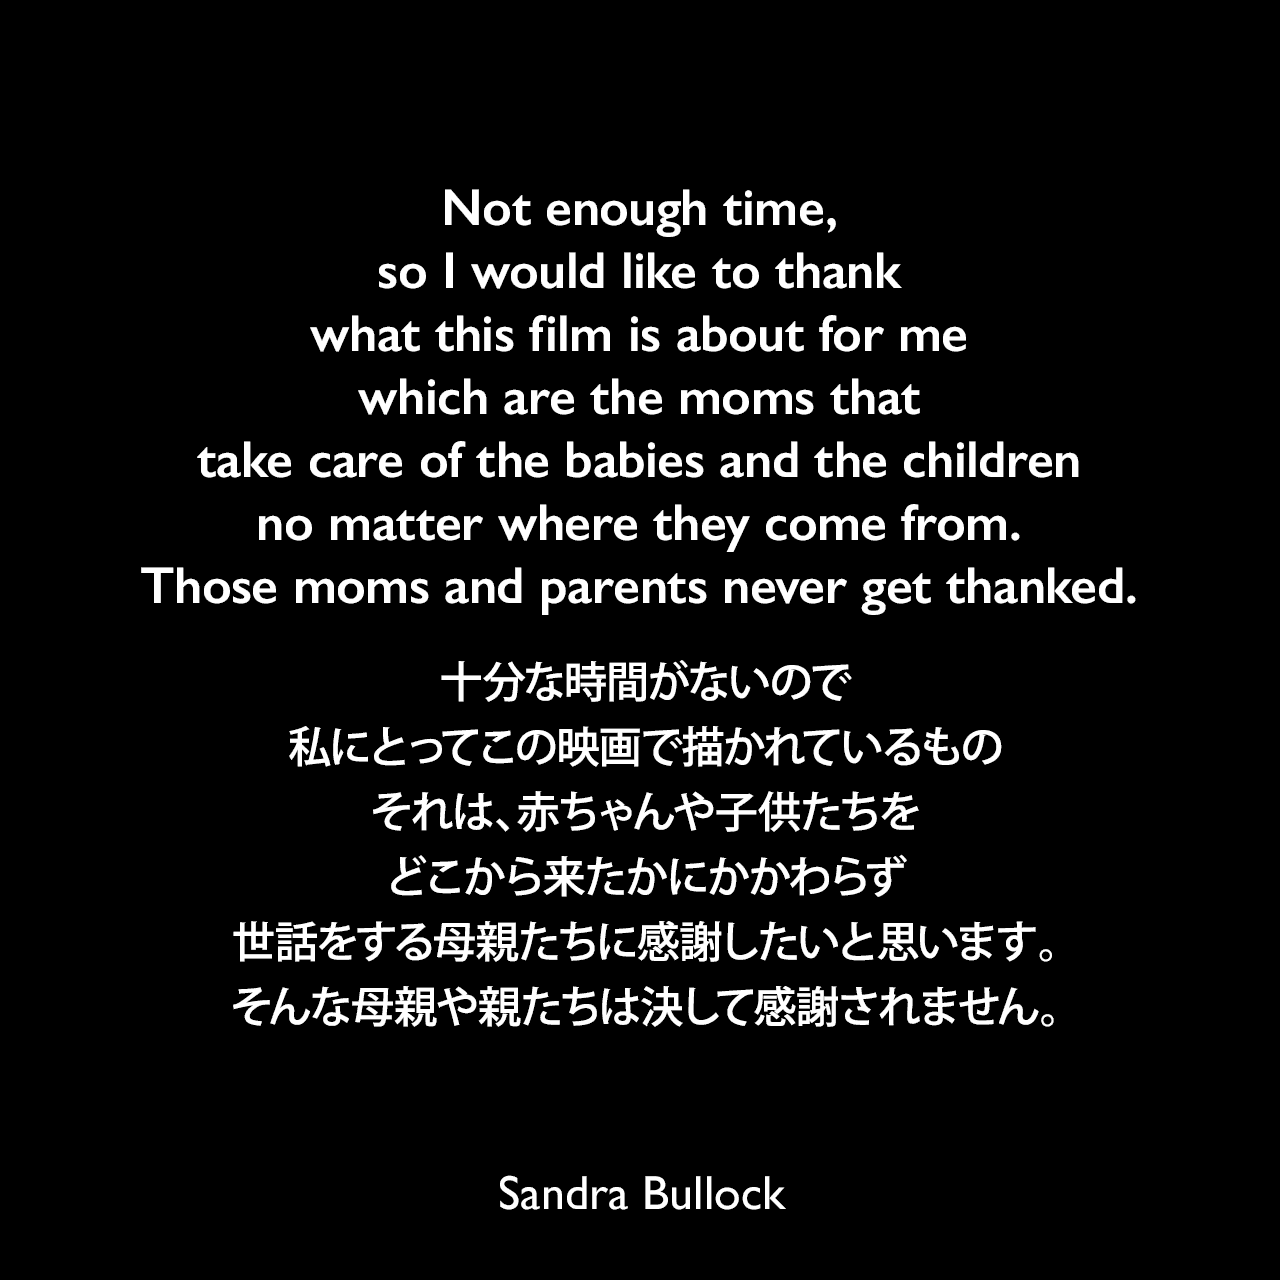 Not enough time, so I would like to thank what this film is about for me which are the moms that take care of the babies and the children no matter where they come from. Those moms and parents never get thanked.十分な時間がないので、私にとってこの映画で描かれているもの、それは、赤ちゃんや子供たちをどこから来たかにかかわらず世話をする母親たちに感謝したいと思います。そんな母親や親たちは決して感謝されません。 - 2010年のアカデミー賞主演女優賞授賞式スピーチSandra Bullock